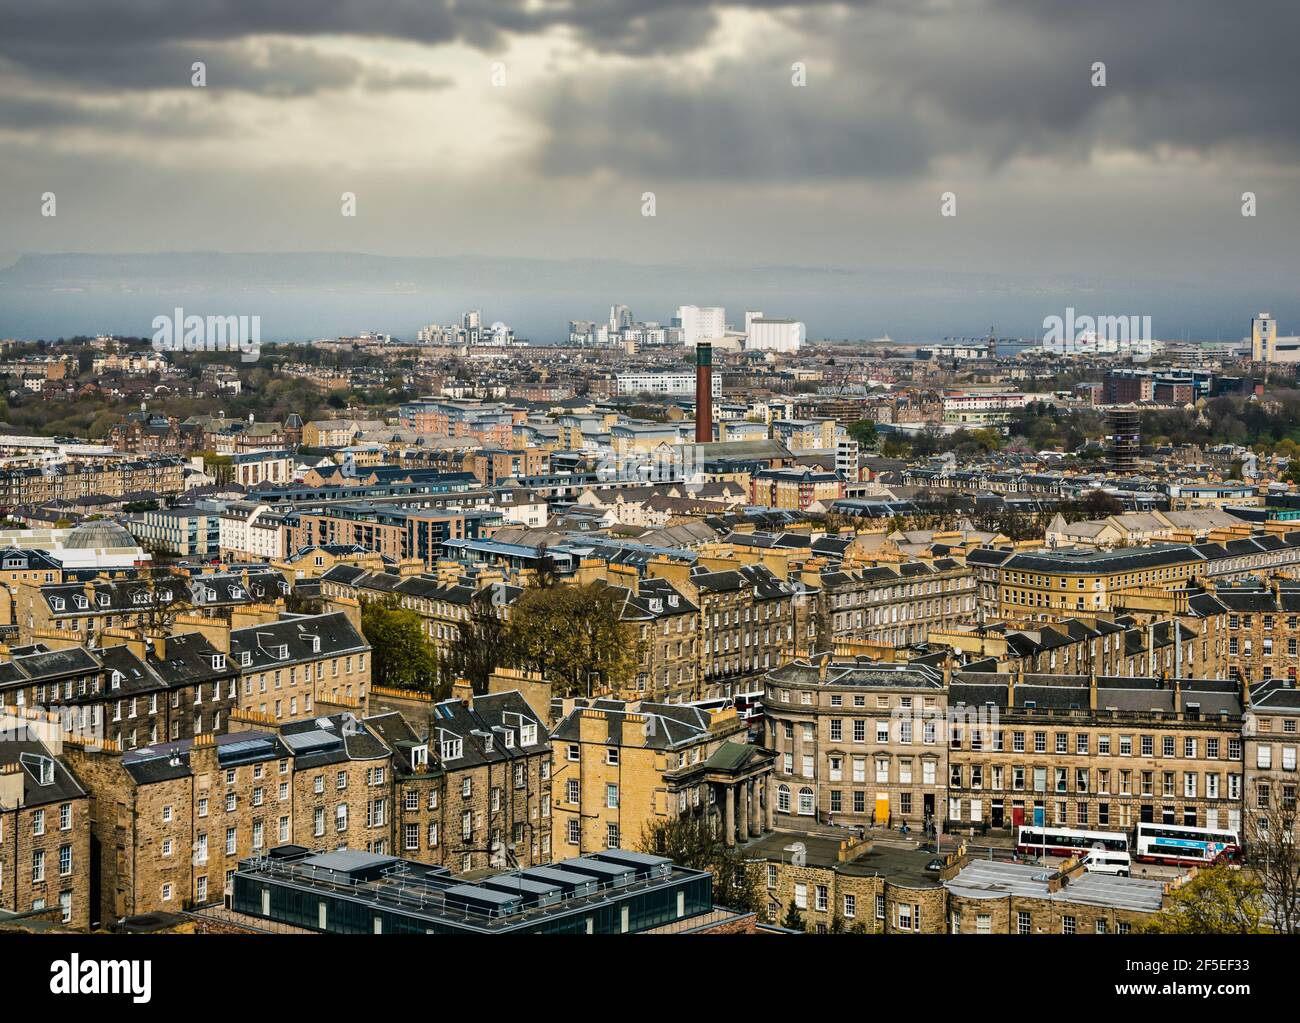 View over New Town tenements from Calton Hill to Firth of Forth with a stormy sky, Edinburgh, Scotland, UK Stock Photo